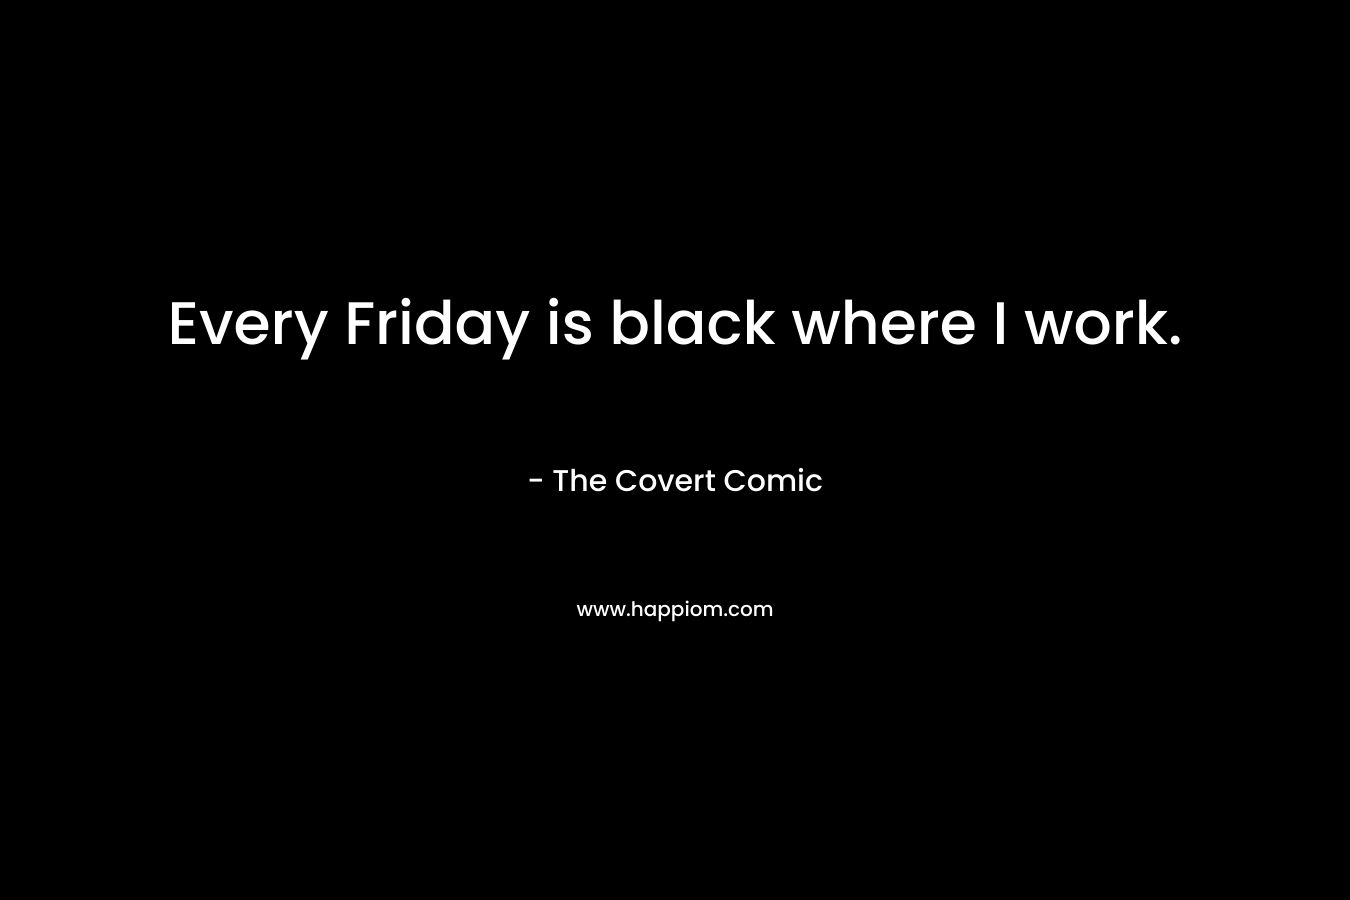 Every Friday is black where I work.